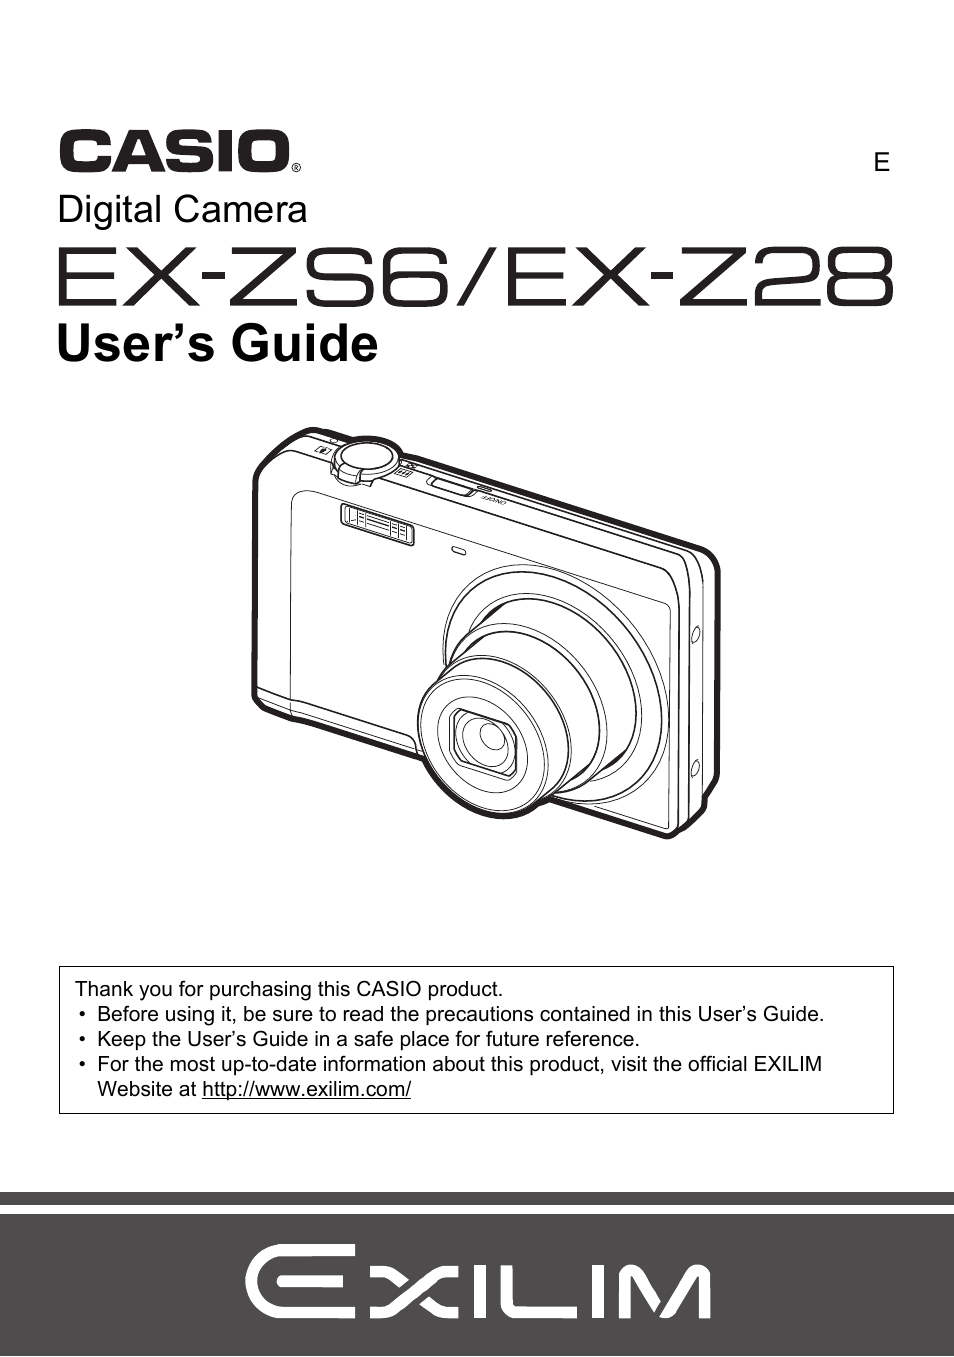 Casio EXILIM EX-Z28 User Manual | 137 pages | Also for: EXILIM EX-ZS6, EX- Z28, EX-ZS6, EX-ZS12, EXILIM EX-Z690, EXILIM EX-ZS20, EX-ZS150, EXILIM EX-ZS150,  EX-H50, EX-ZS200, EXILIM EX-N1, EXILIM EX-ZS100, EX-ZS160